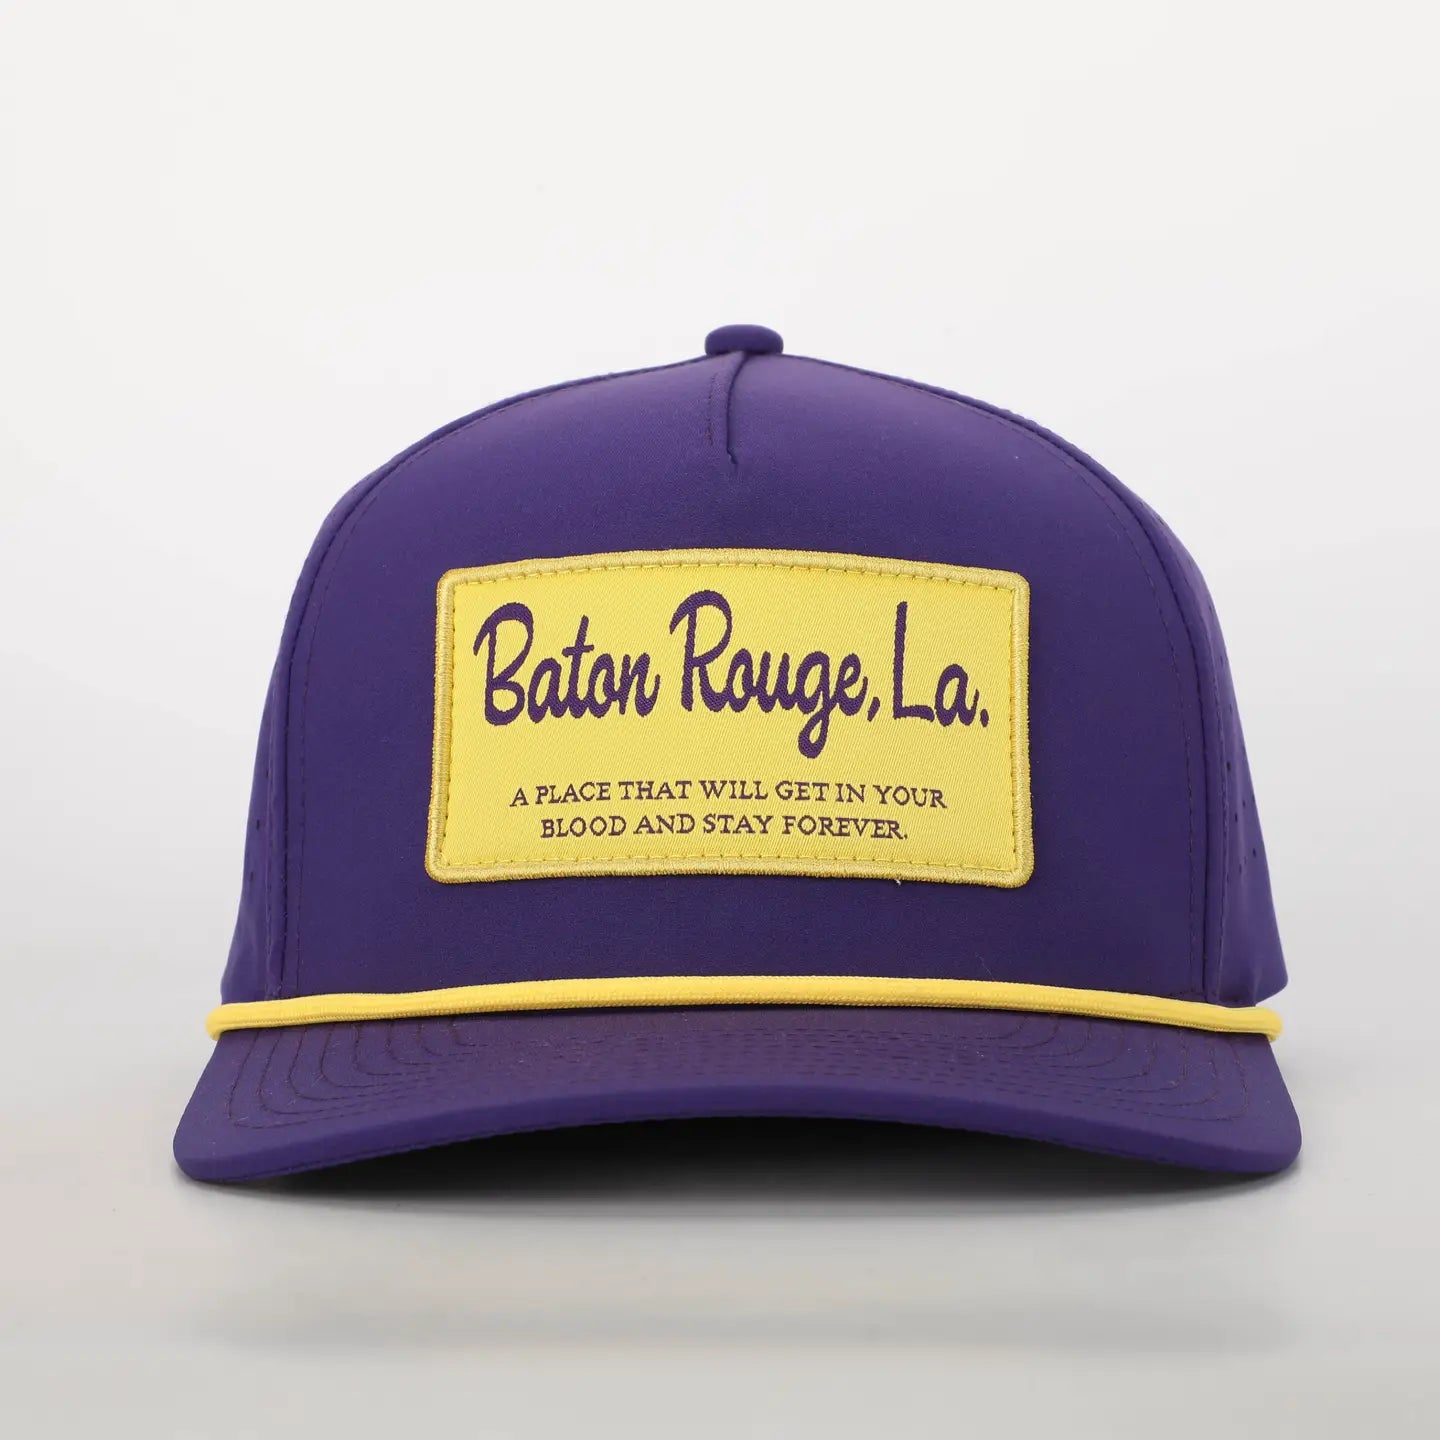 Baton Rouge, La Rope Hat with Patch